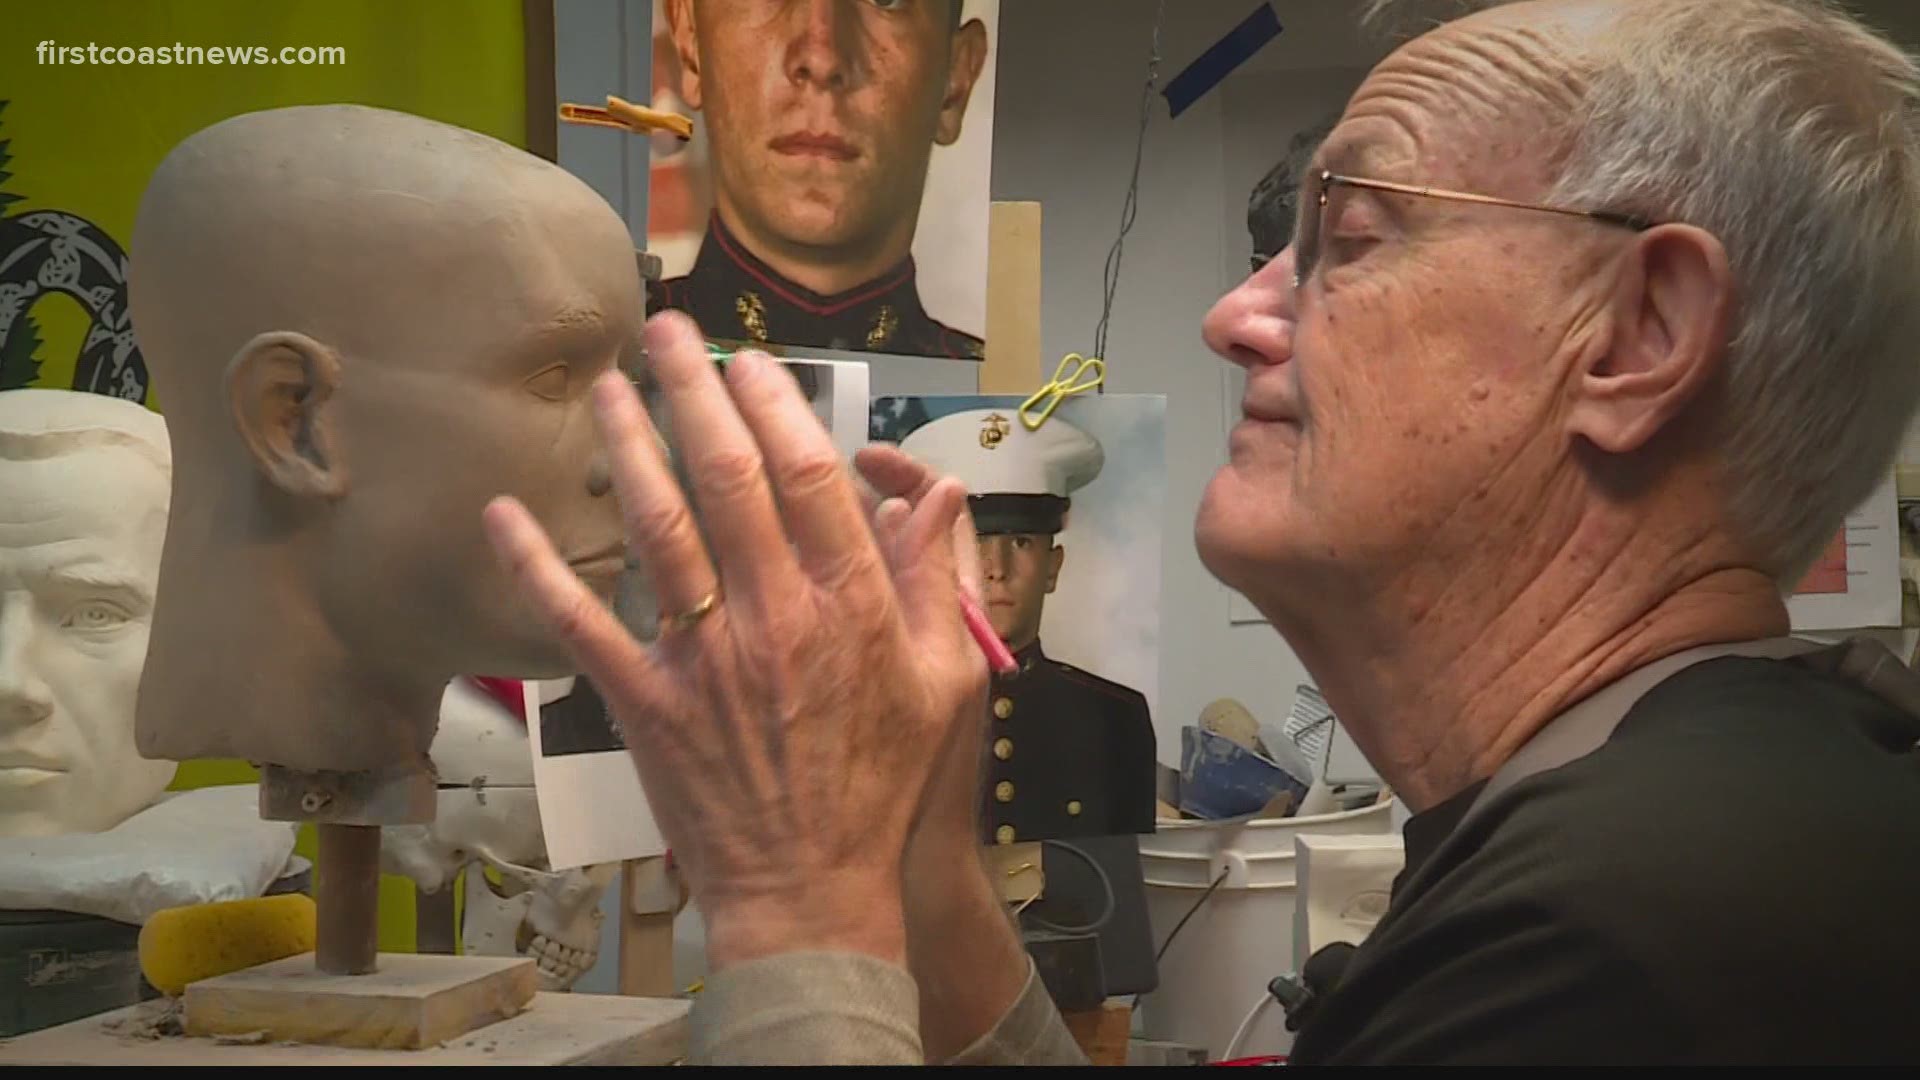 Cliff Leonard has made about 50 bronze busts over the past 13 years to remember our fallen service members. Each one takes about two months to make.